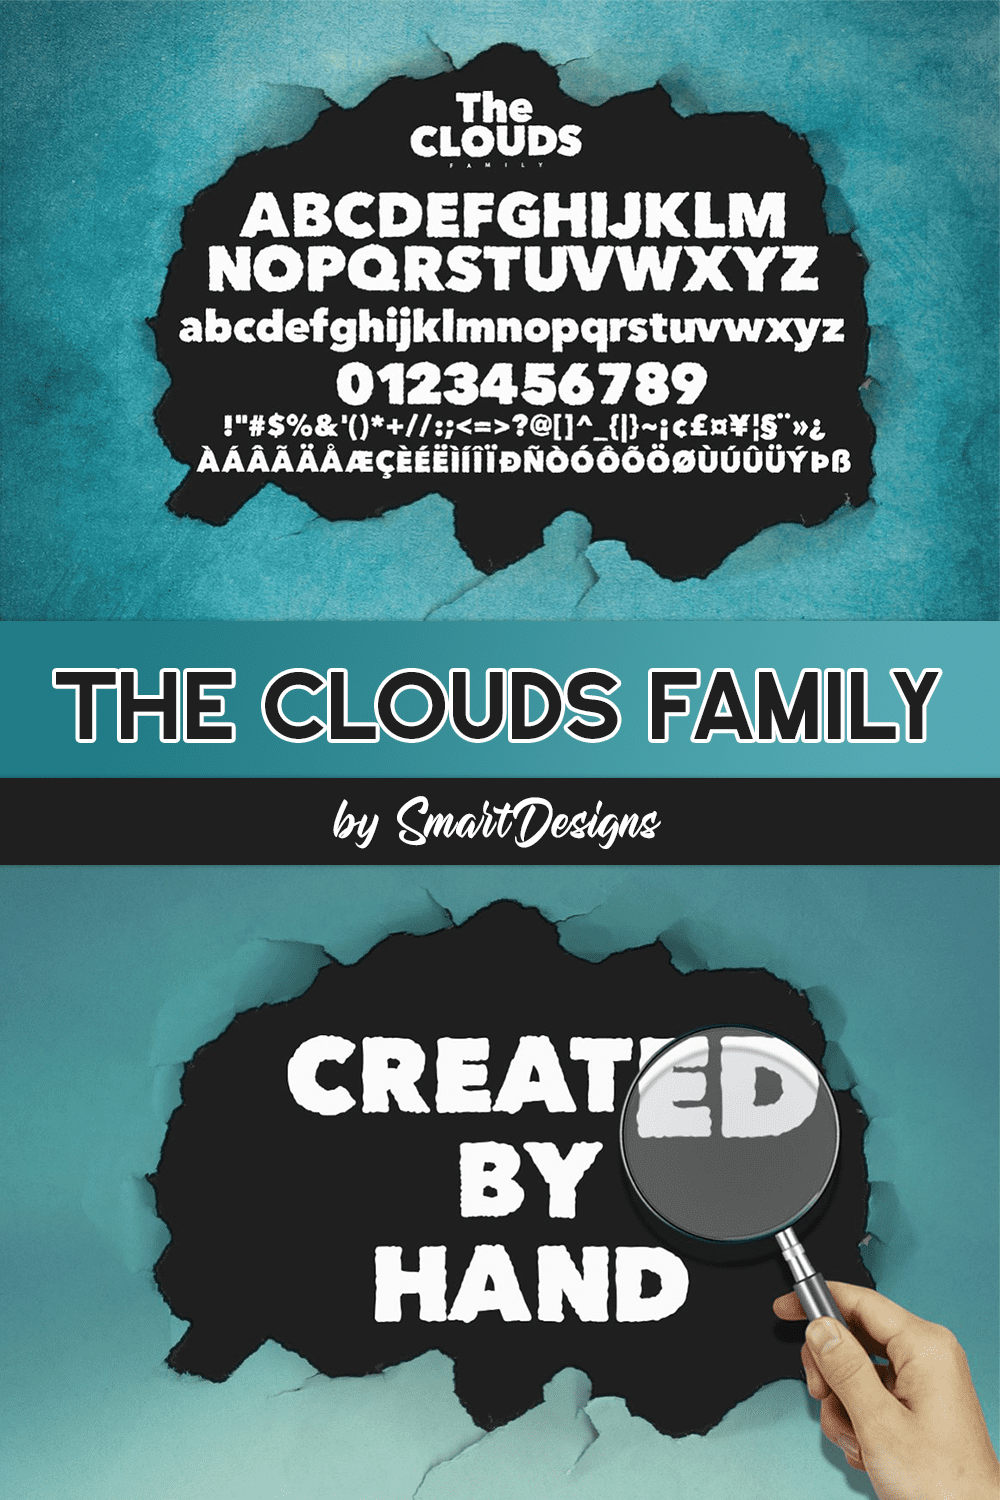 The clouds family of pinterest.